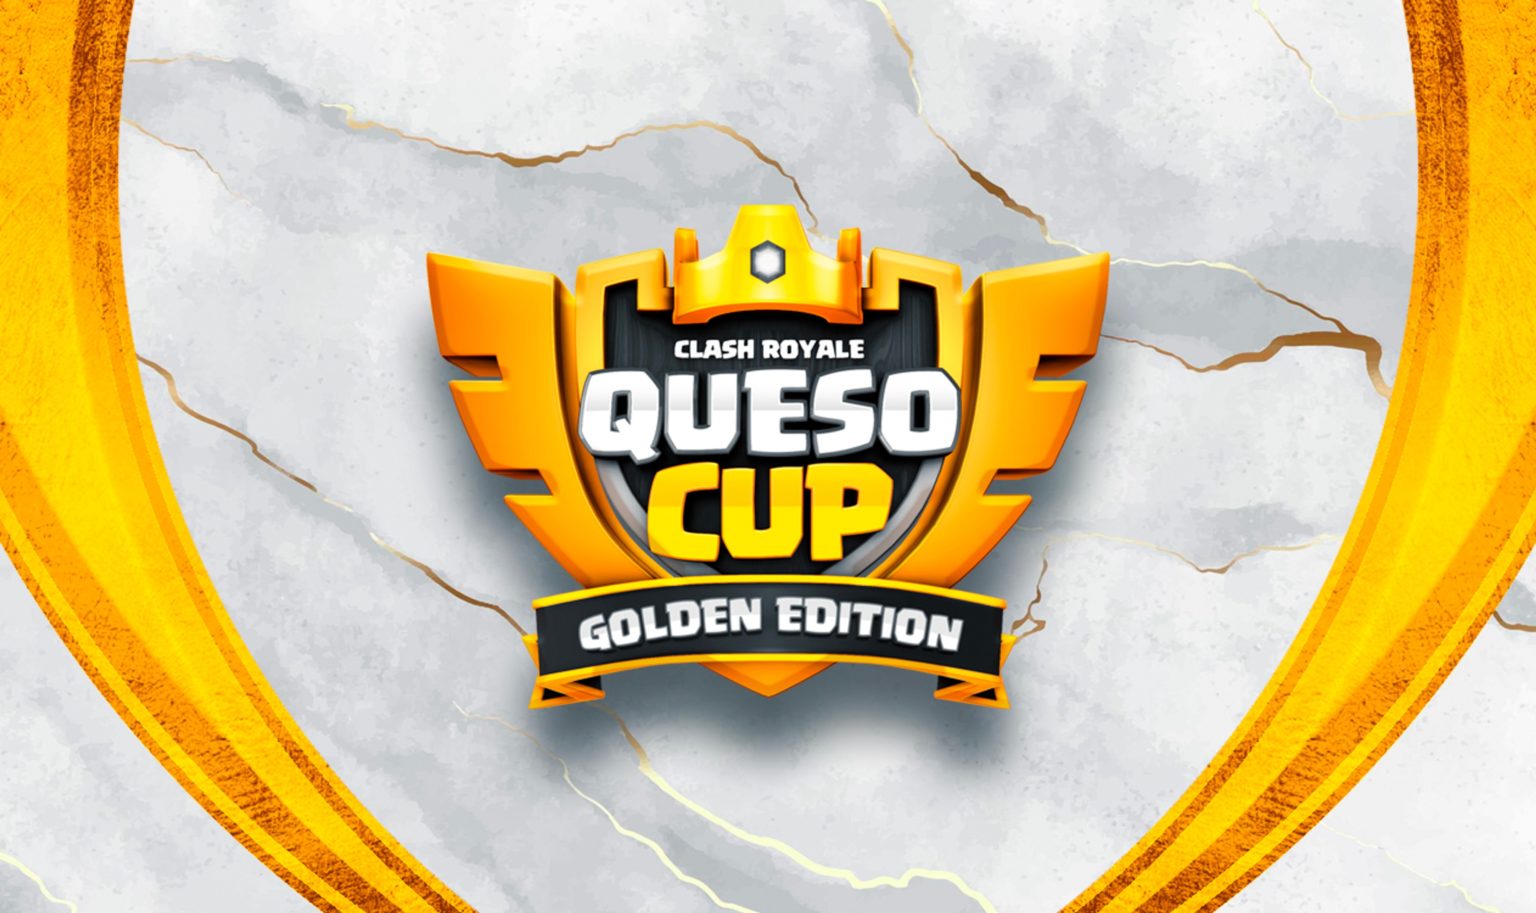 clash royale queso cup golden edition tournament gives golden ticket to crl world finals 2022